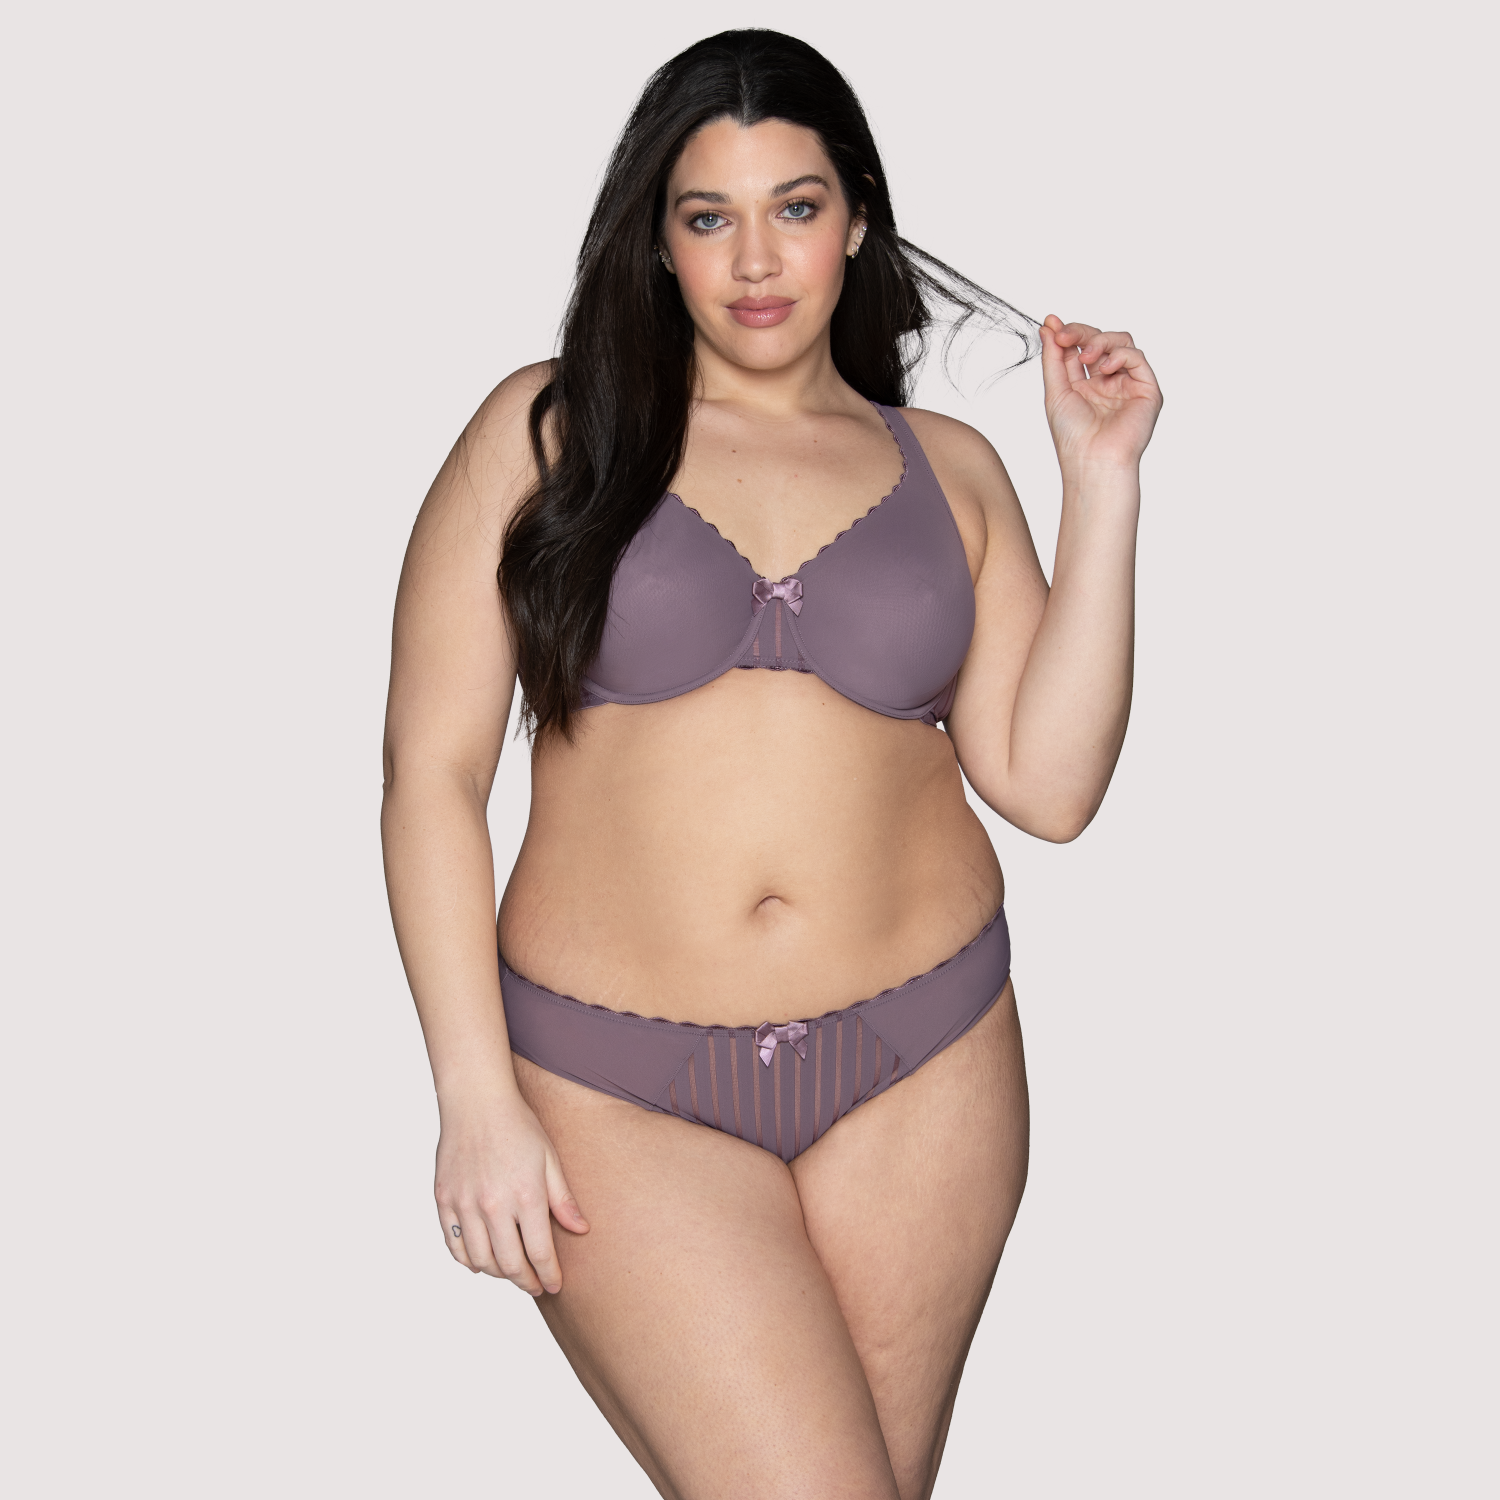 Scallop Simples sexy Lingerie Sexy Plus Size